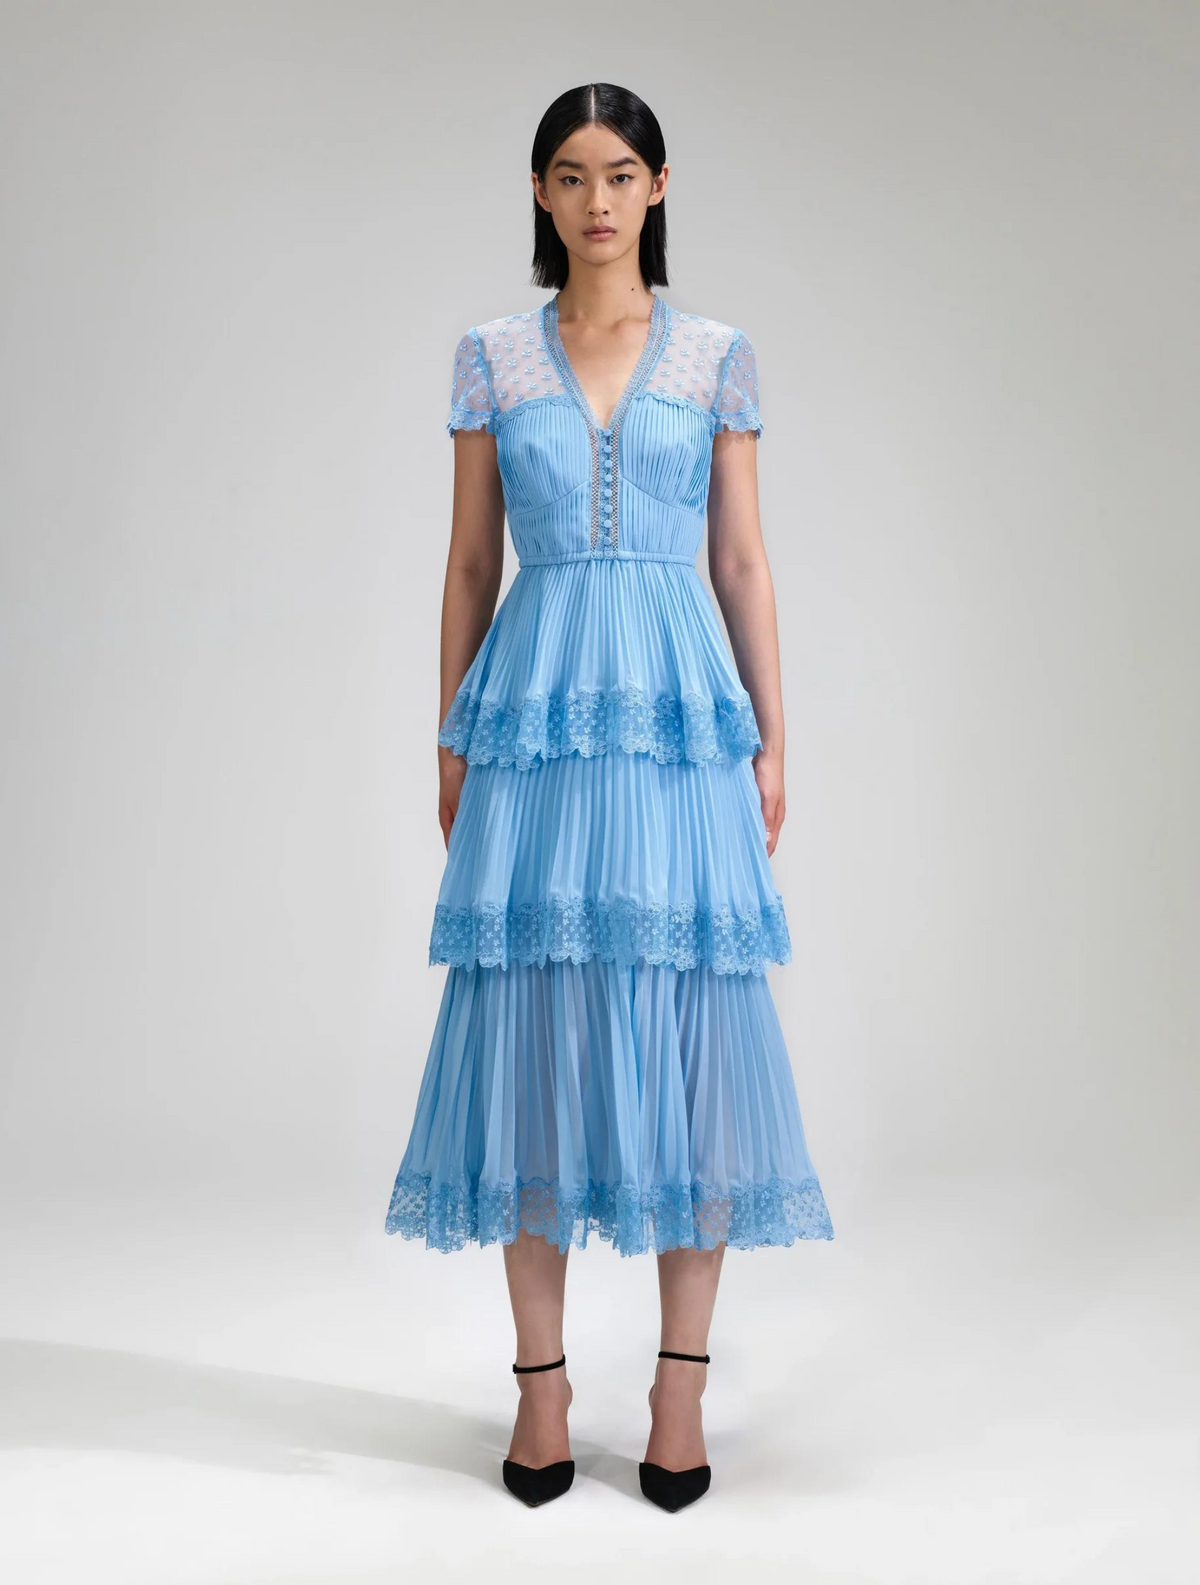 Light blue pleated chiffon lace trimmed midi dress with V neckline and lace shoulders